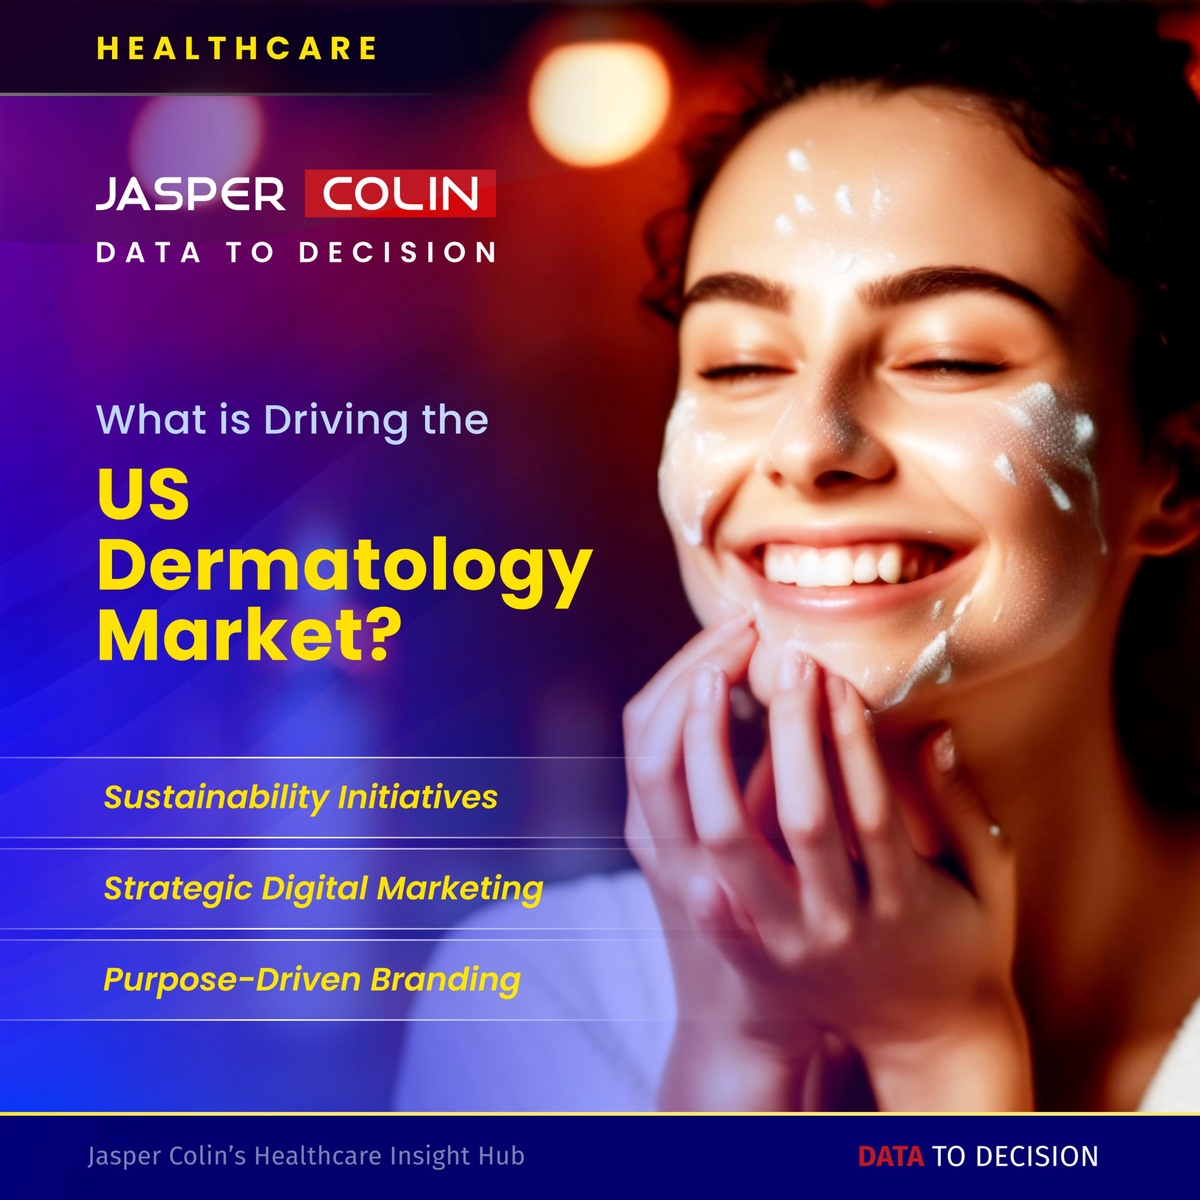 What is Driving the US Dermatology Market?